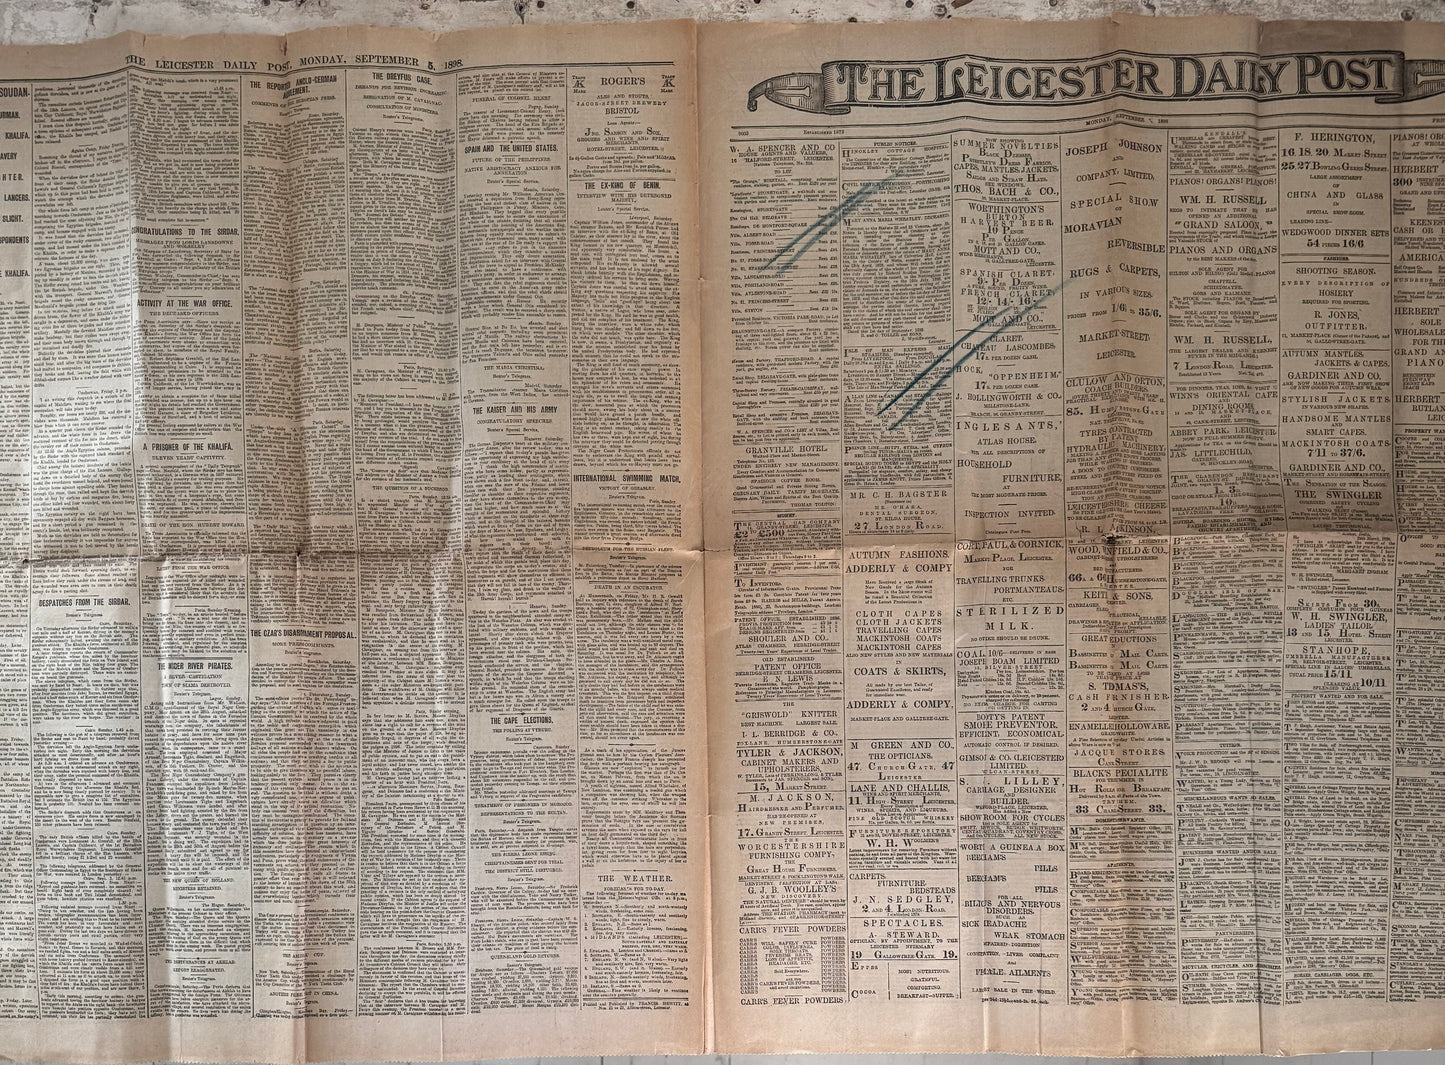 The Leicester Daily Post Sept. 5th, 1898